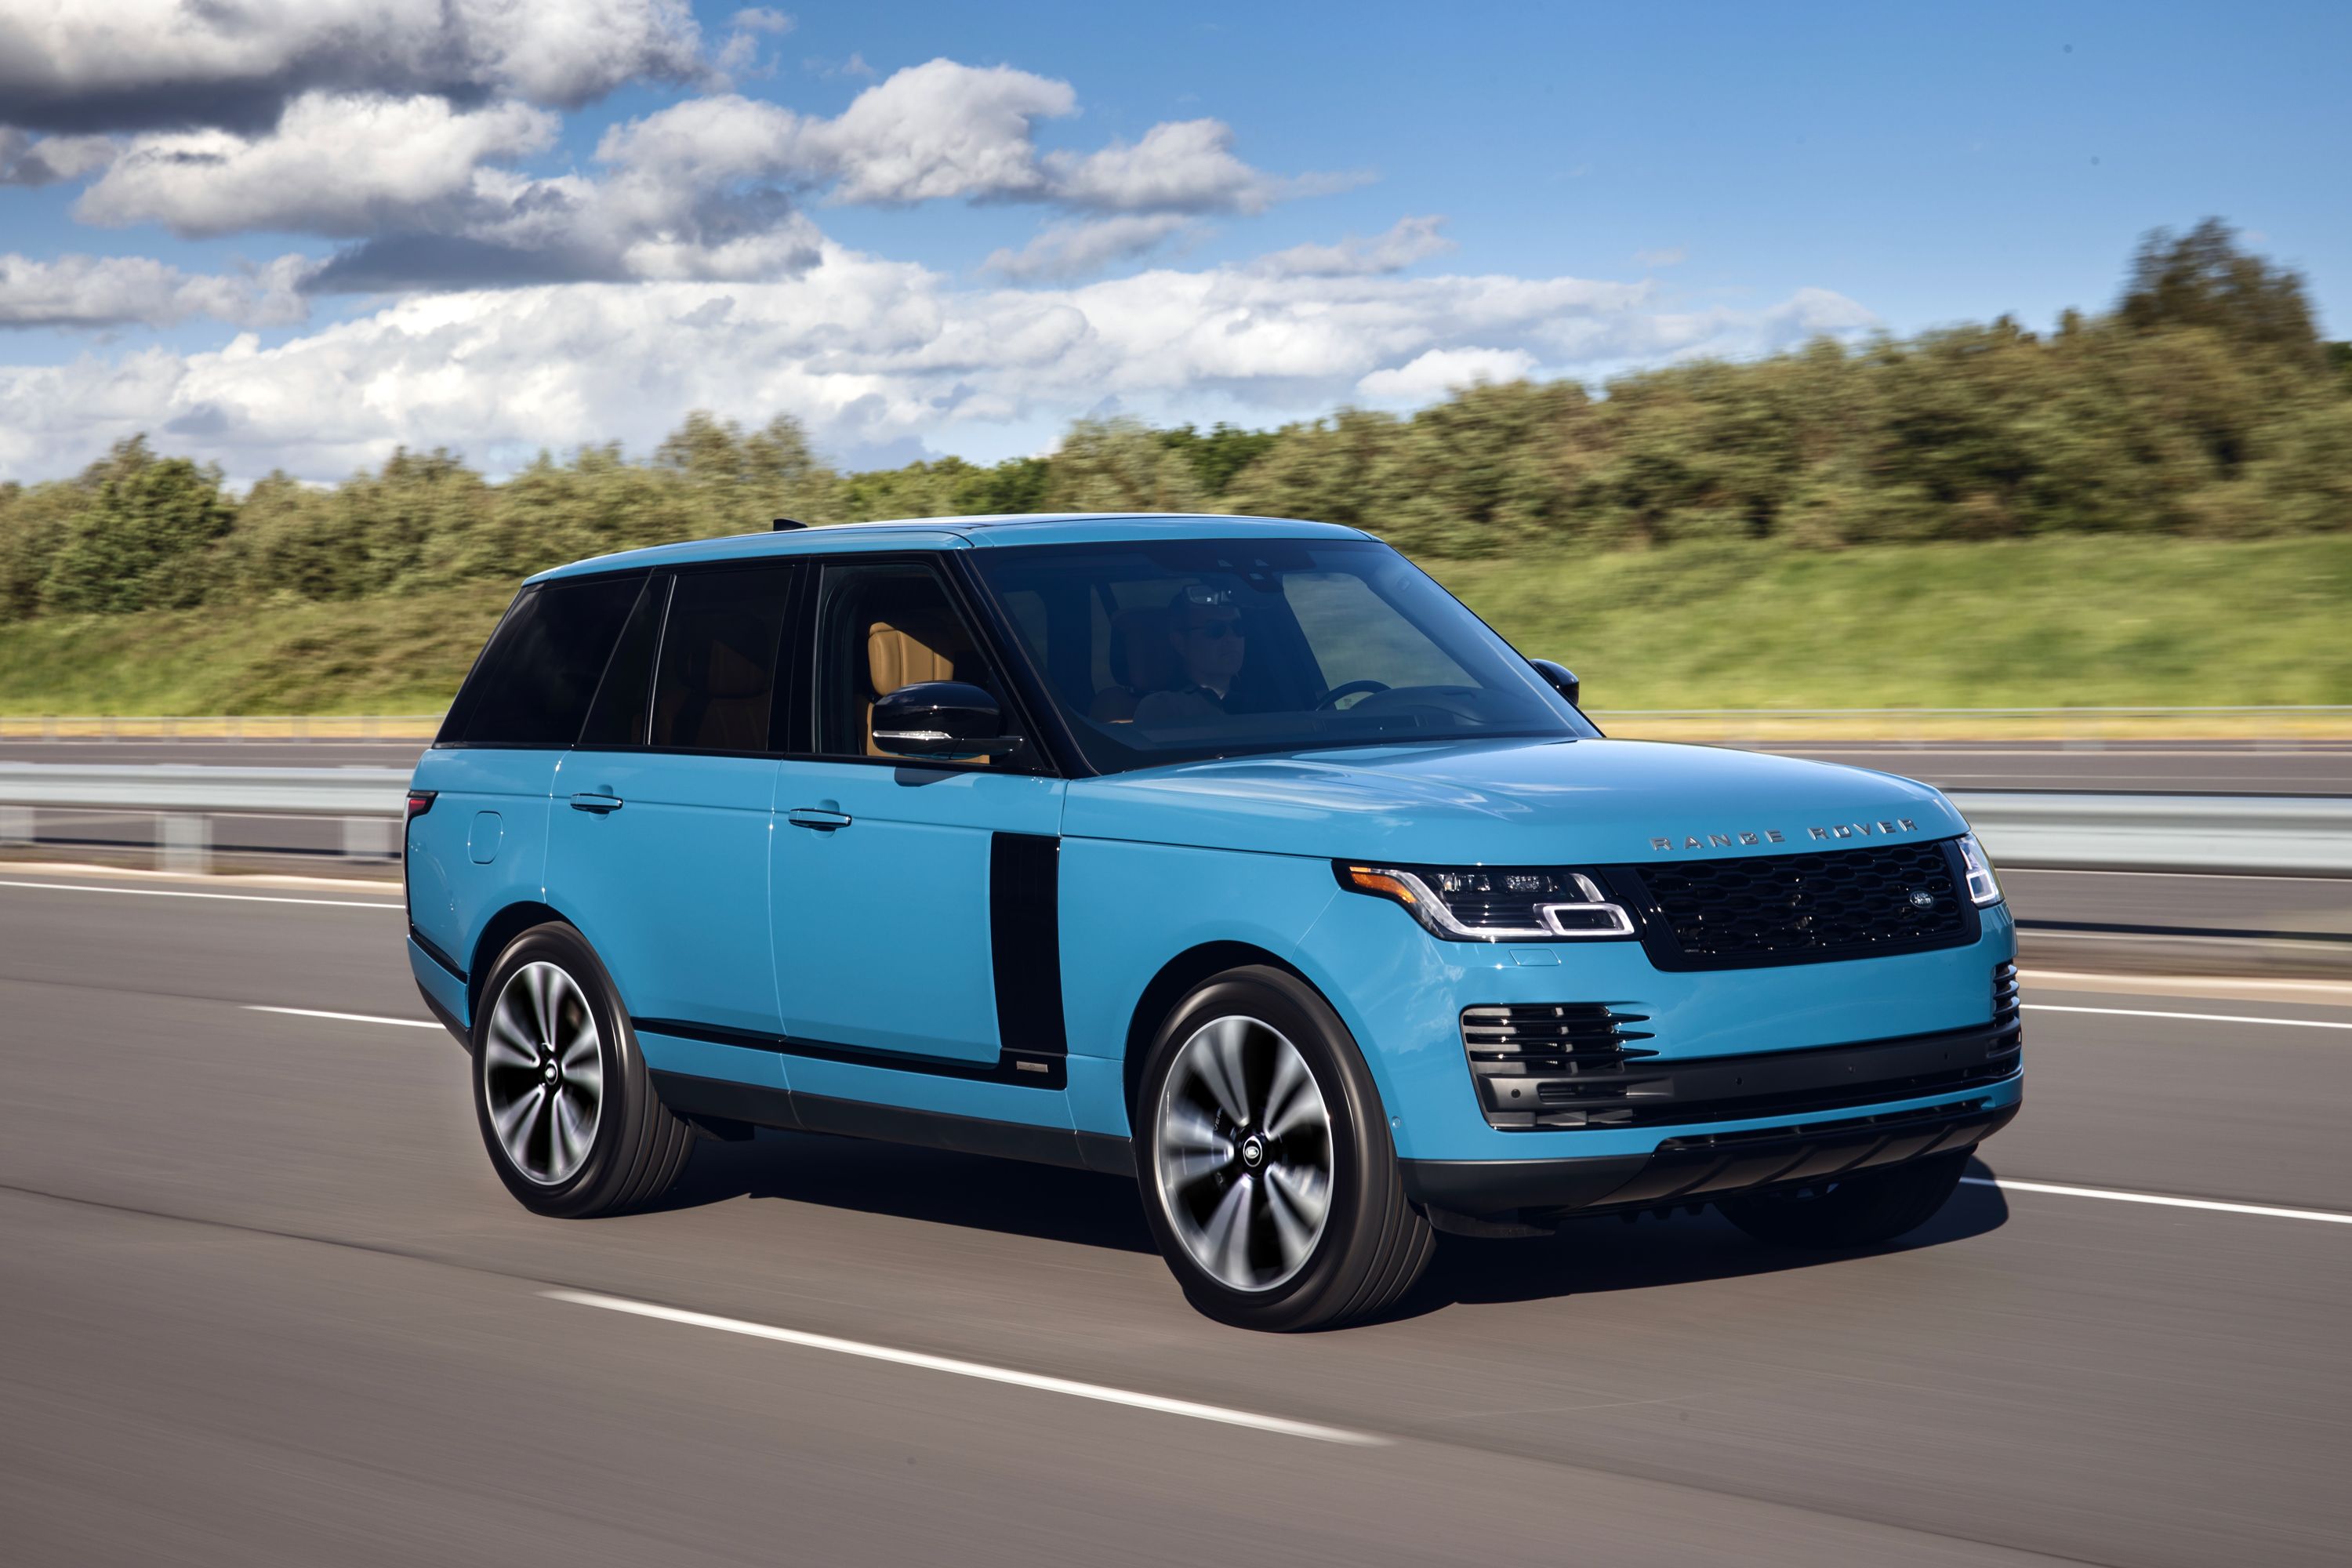 2021 Land Rover Range Rover Review, Pricing, and Specs